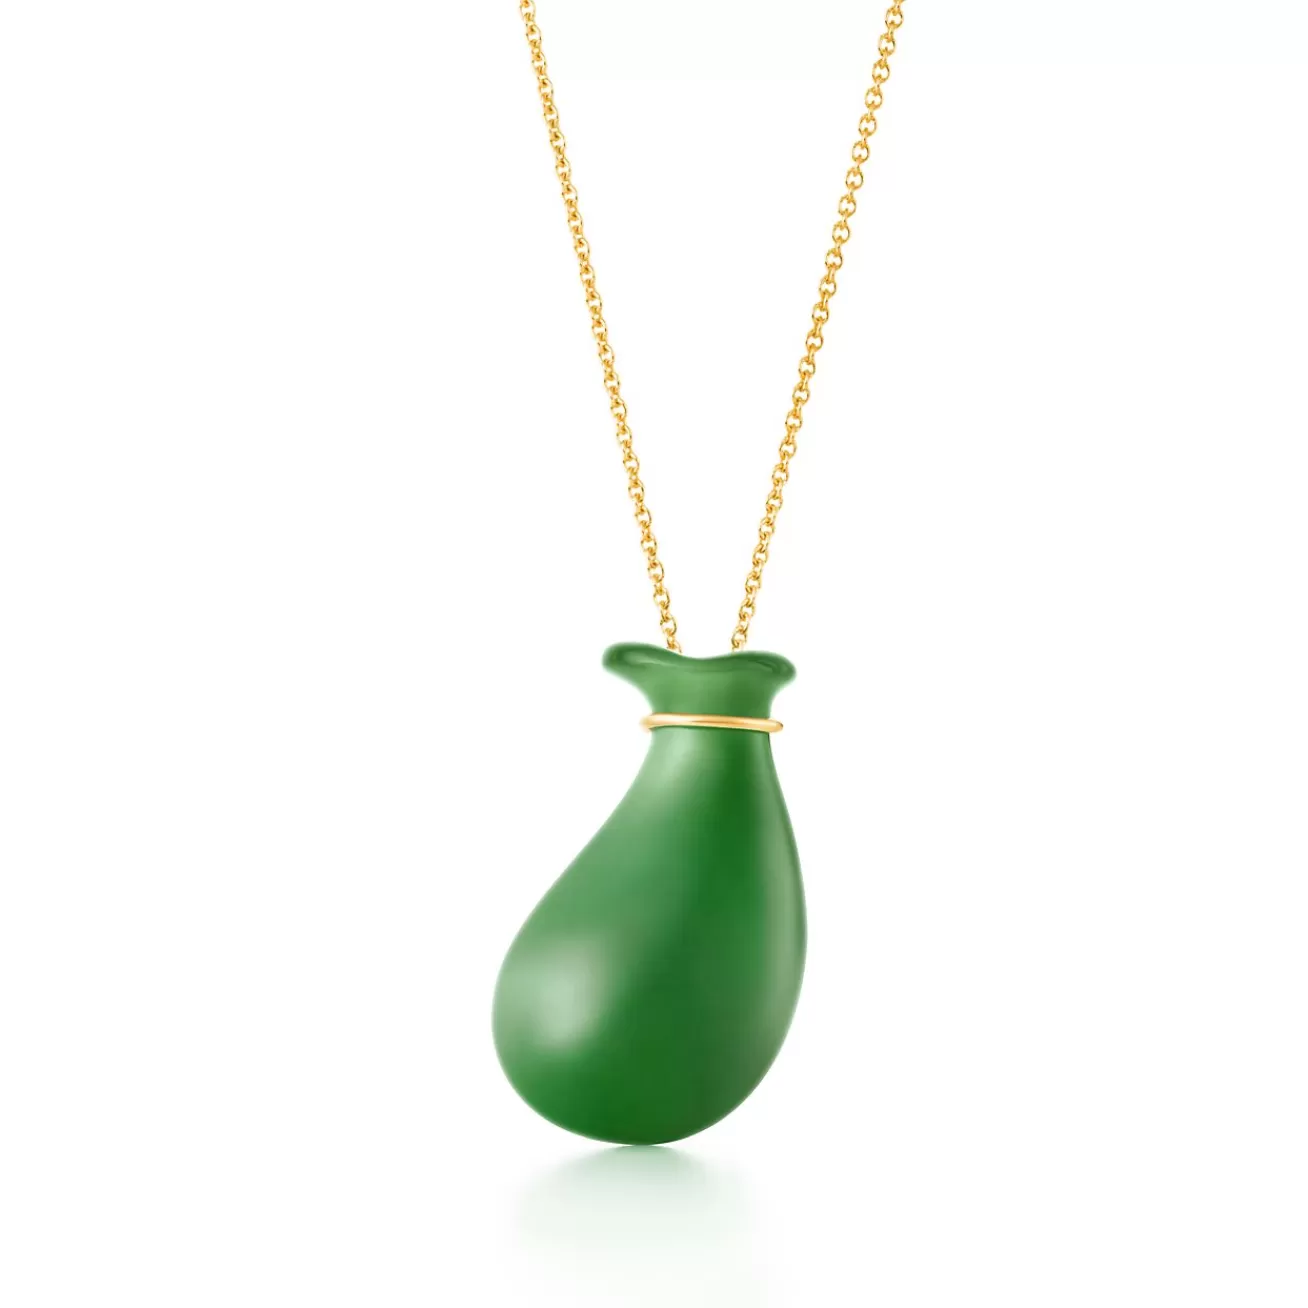 Tiffany & Co. Elsa Peretti® Bottle jug pendant in green jade on an 18k gold chain. | ^ Necklaces & Pendants | Gold Jewelry